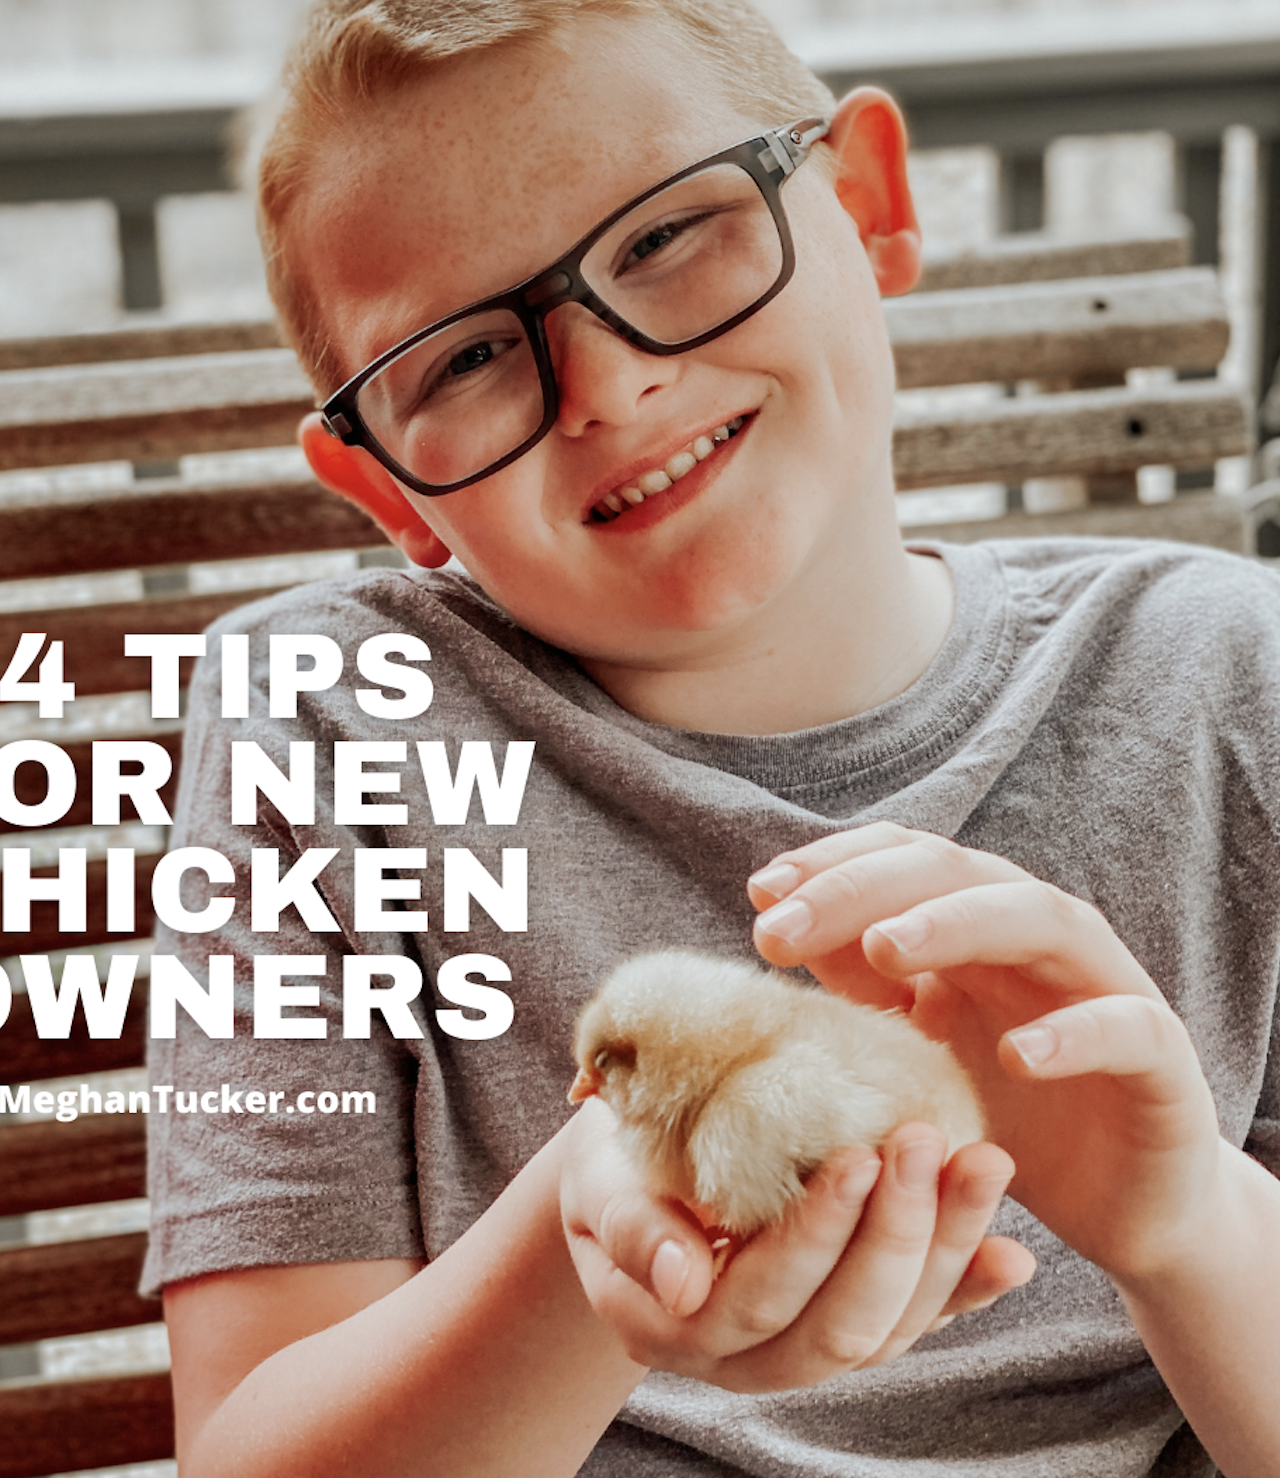 So You Think You Want To Raise Chickens: 4 Tips for New Chicken Owners